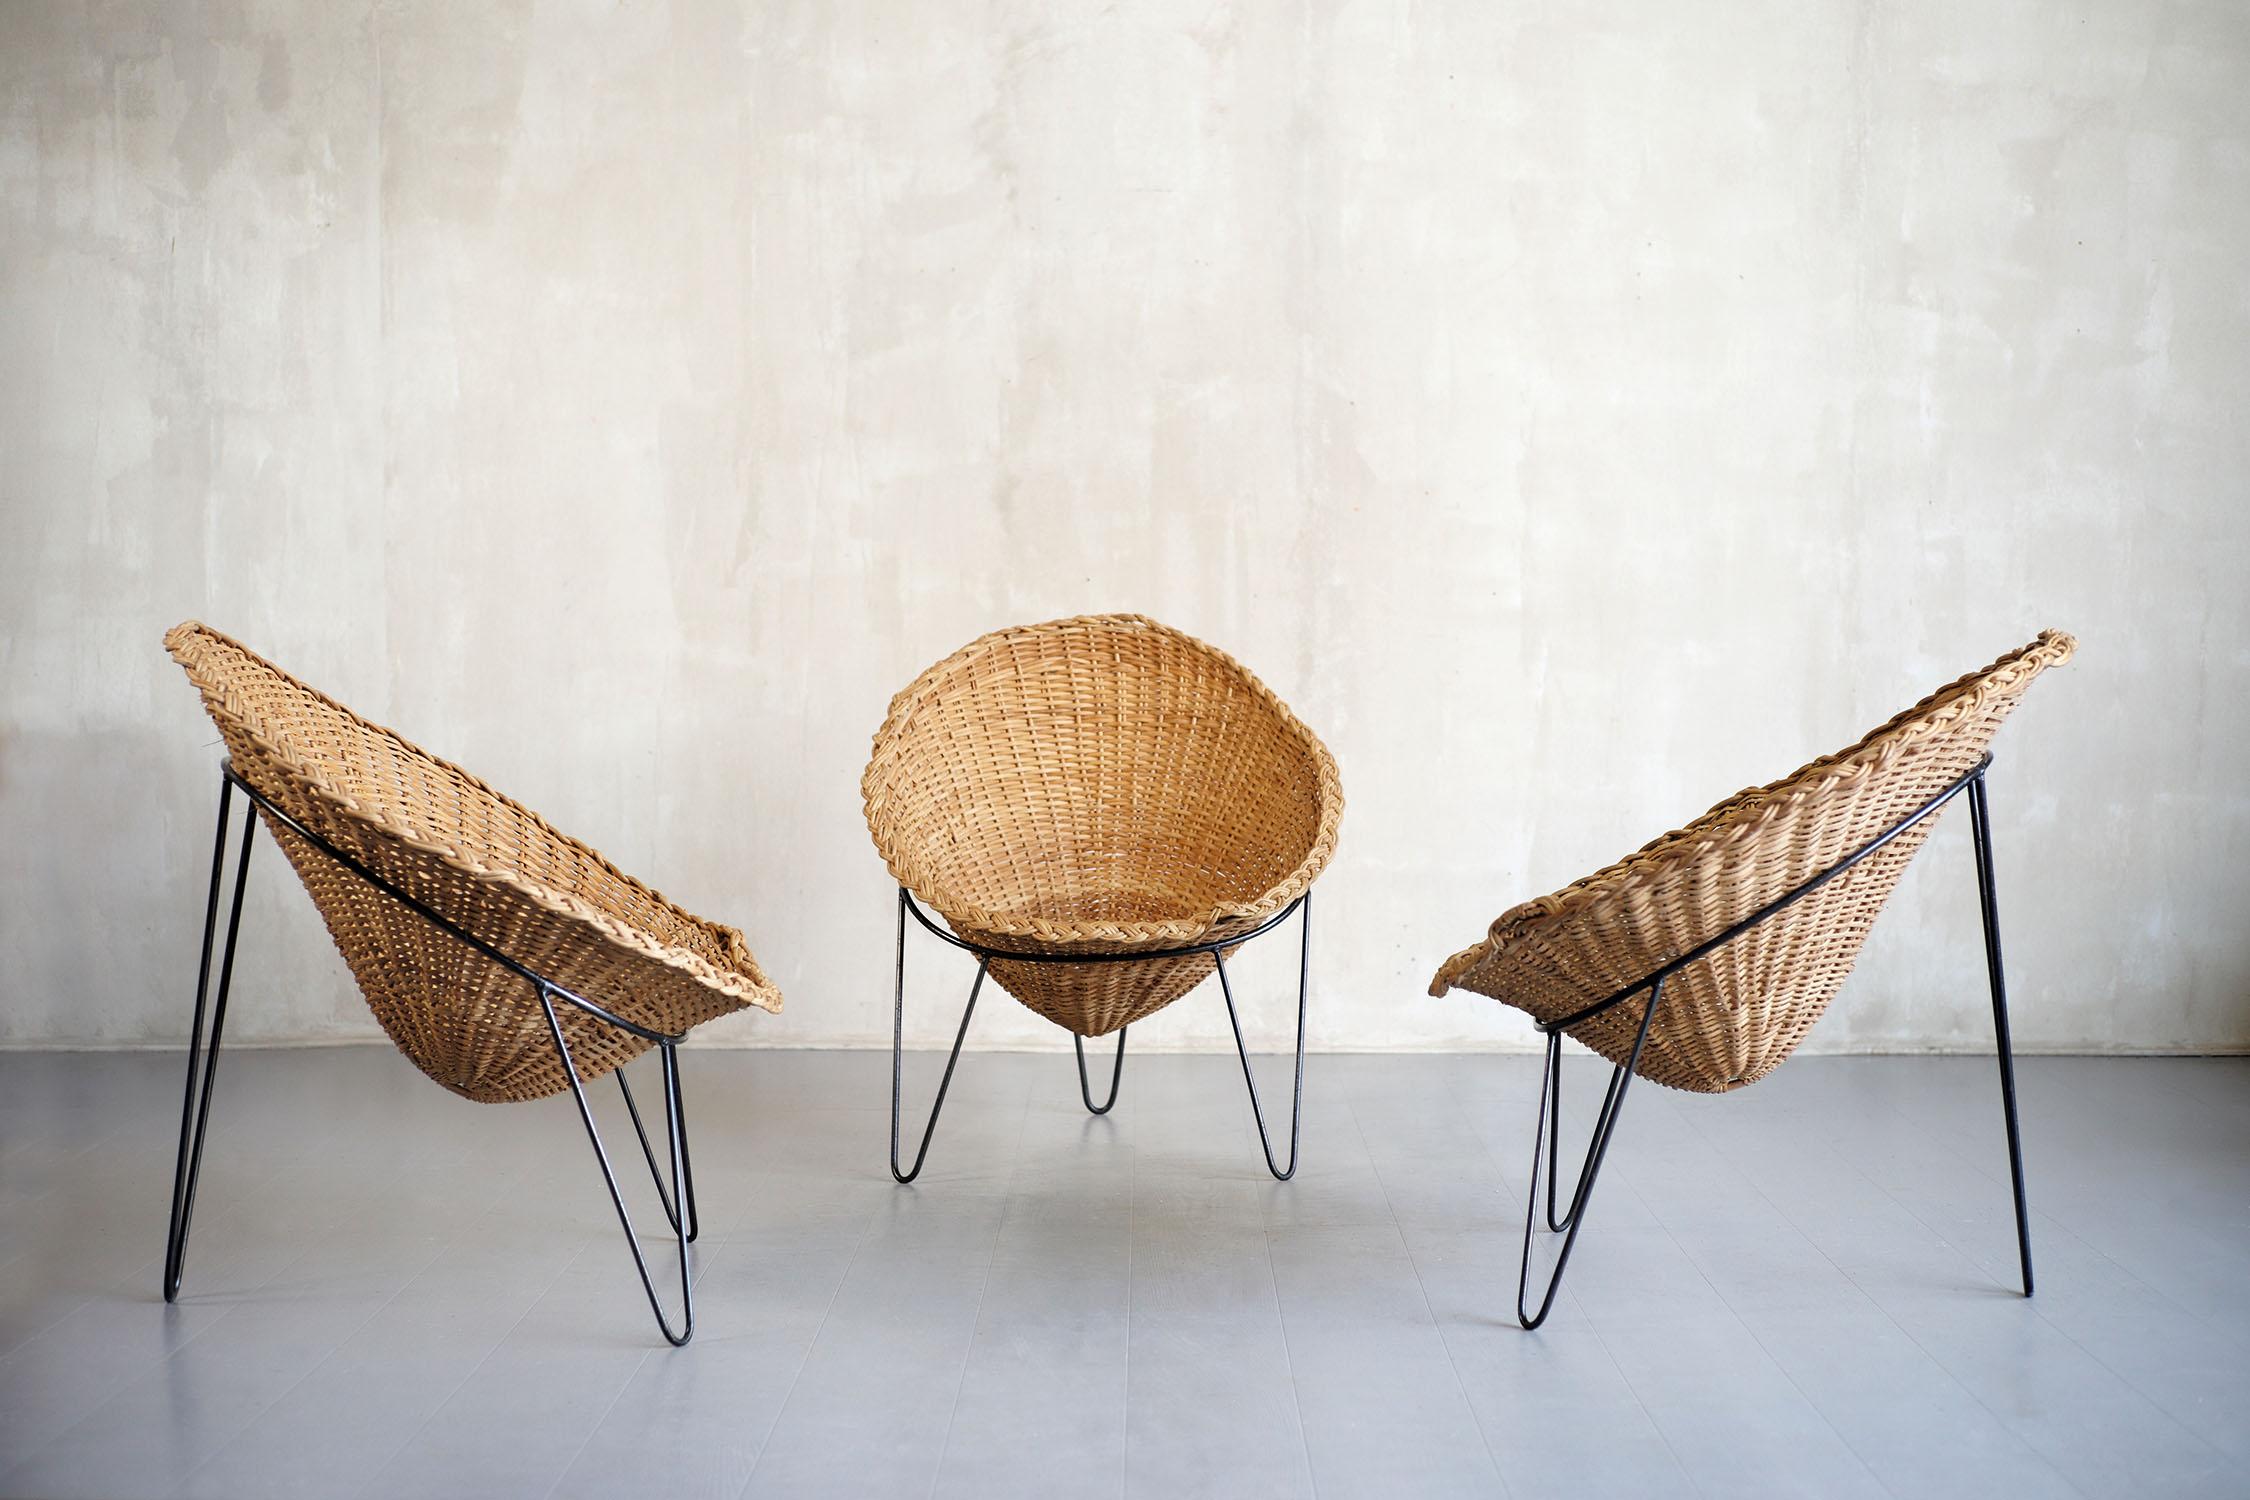 Italian Set of 3 Rattan Armchairs, Italy, 1950 For Sale